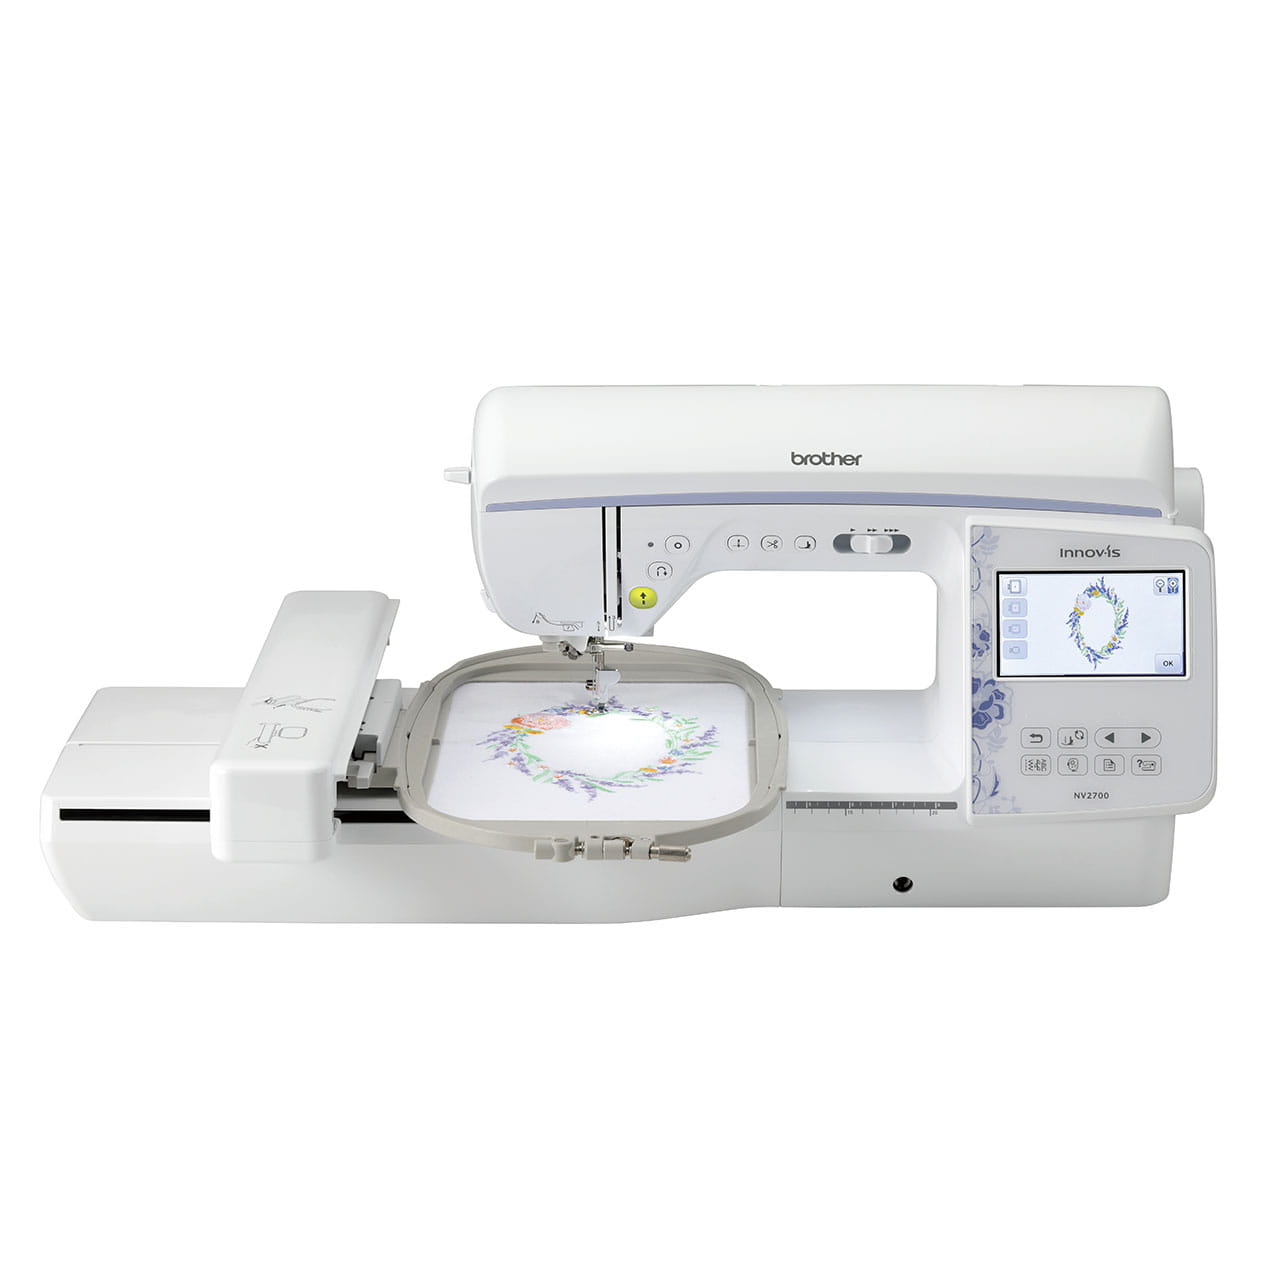 Brother NQ2700 Sewing, Embroidery & Quilting Machine Front View